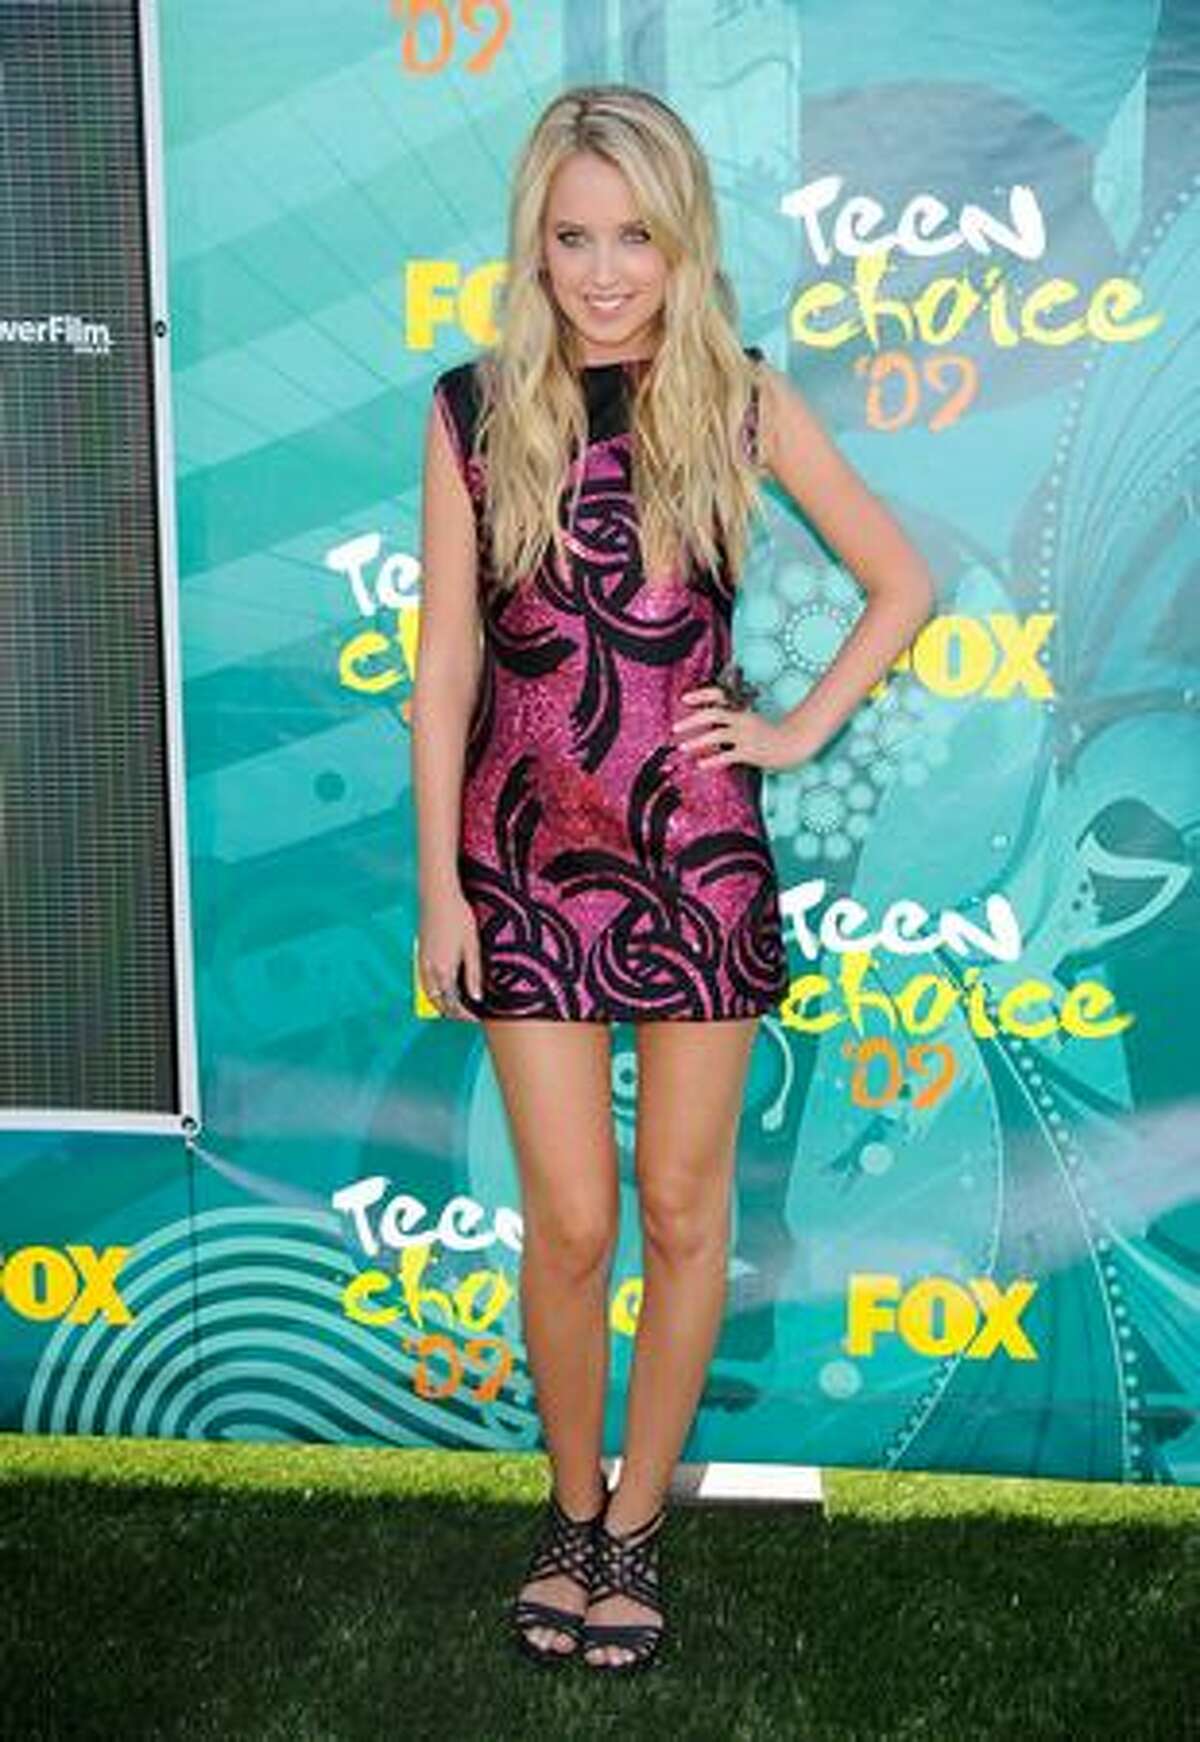 Actress Megan Park arrives at the 2009 Teen Choice Awards held at Gibson Amphitheatre on Sunday in Universal City, California.